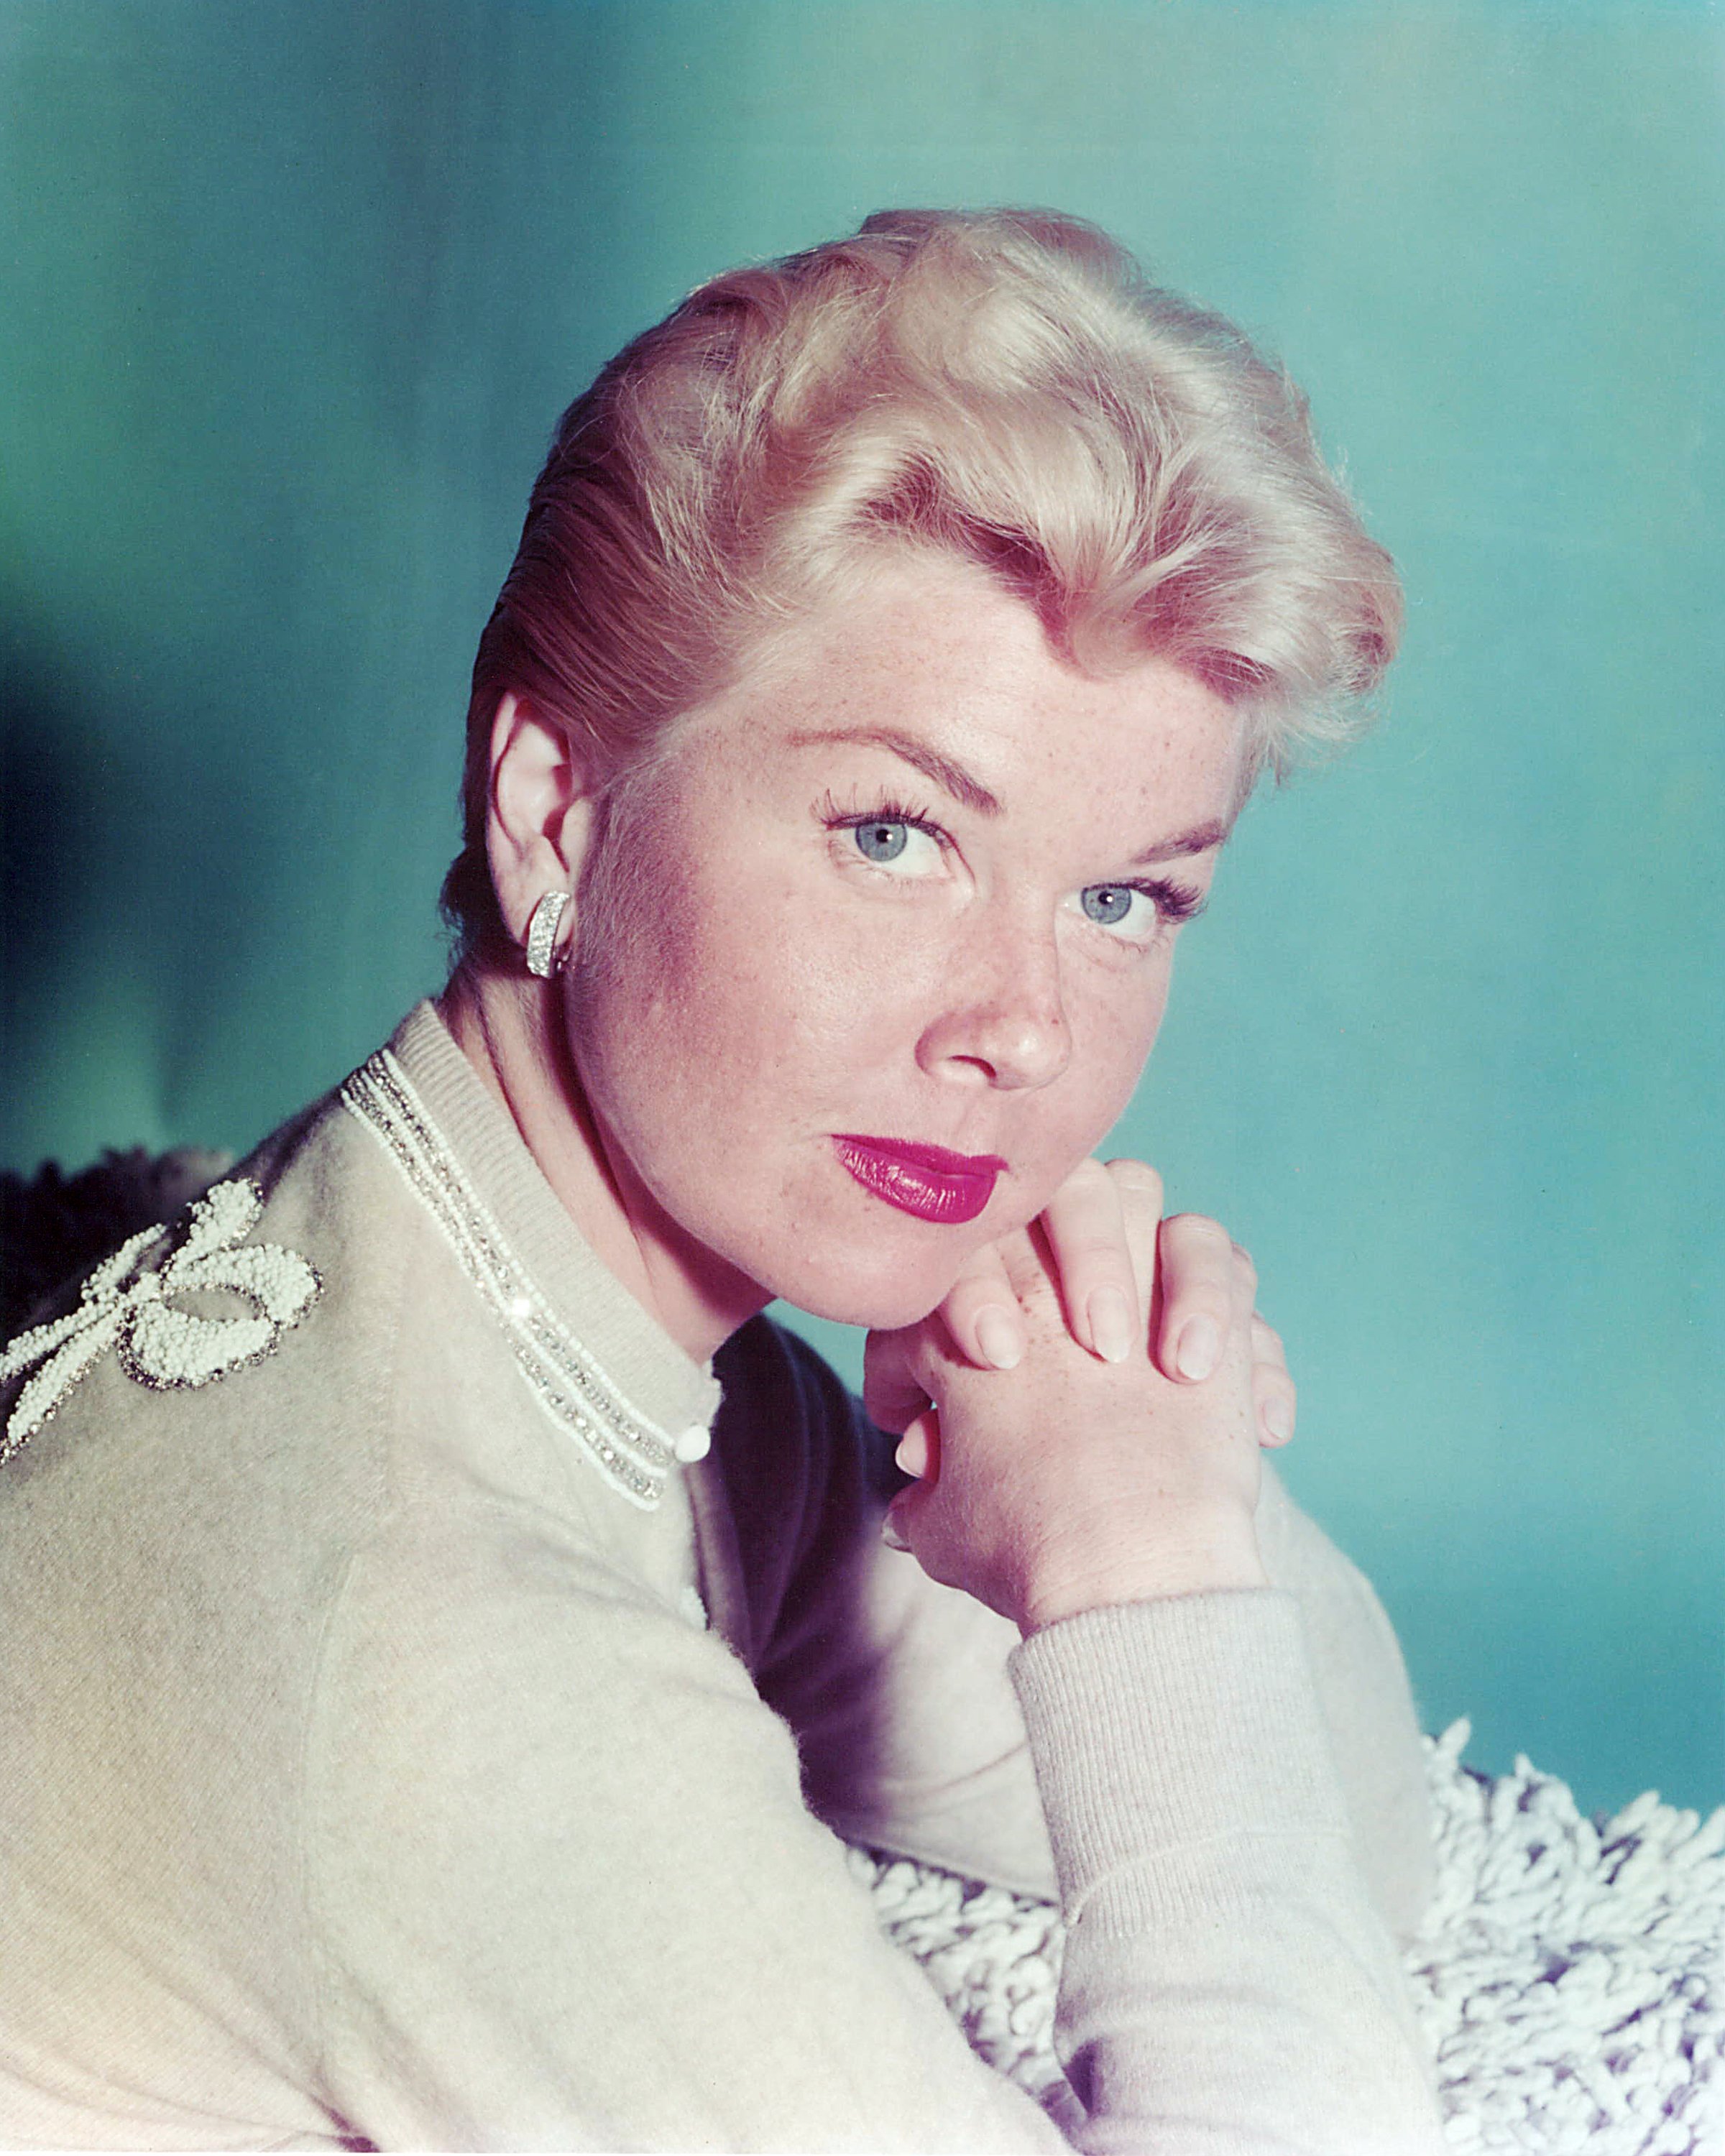 Doris Day wearing a jumper, posing with her hands clasped together against a light blue background in 1955. / Source: Getty Images